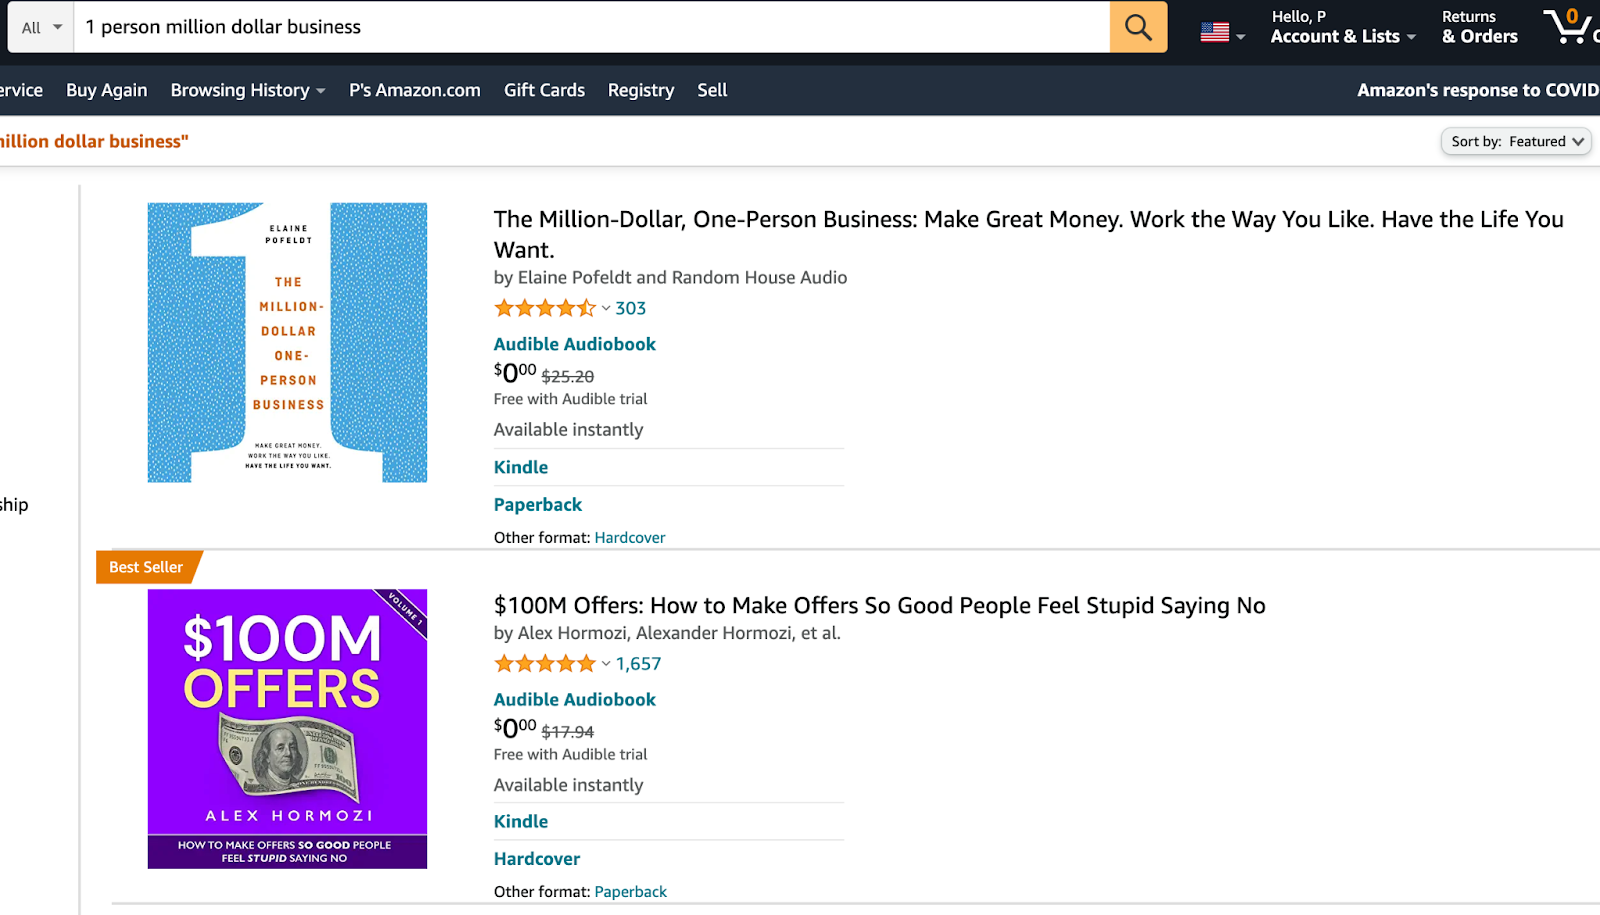 How to rank on Amazon search